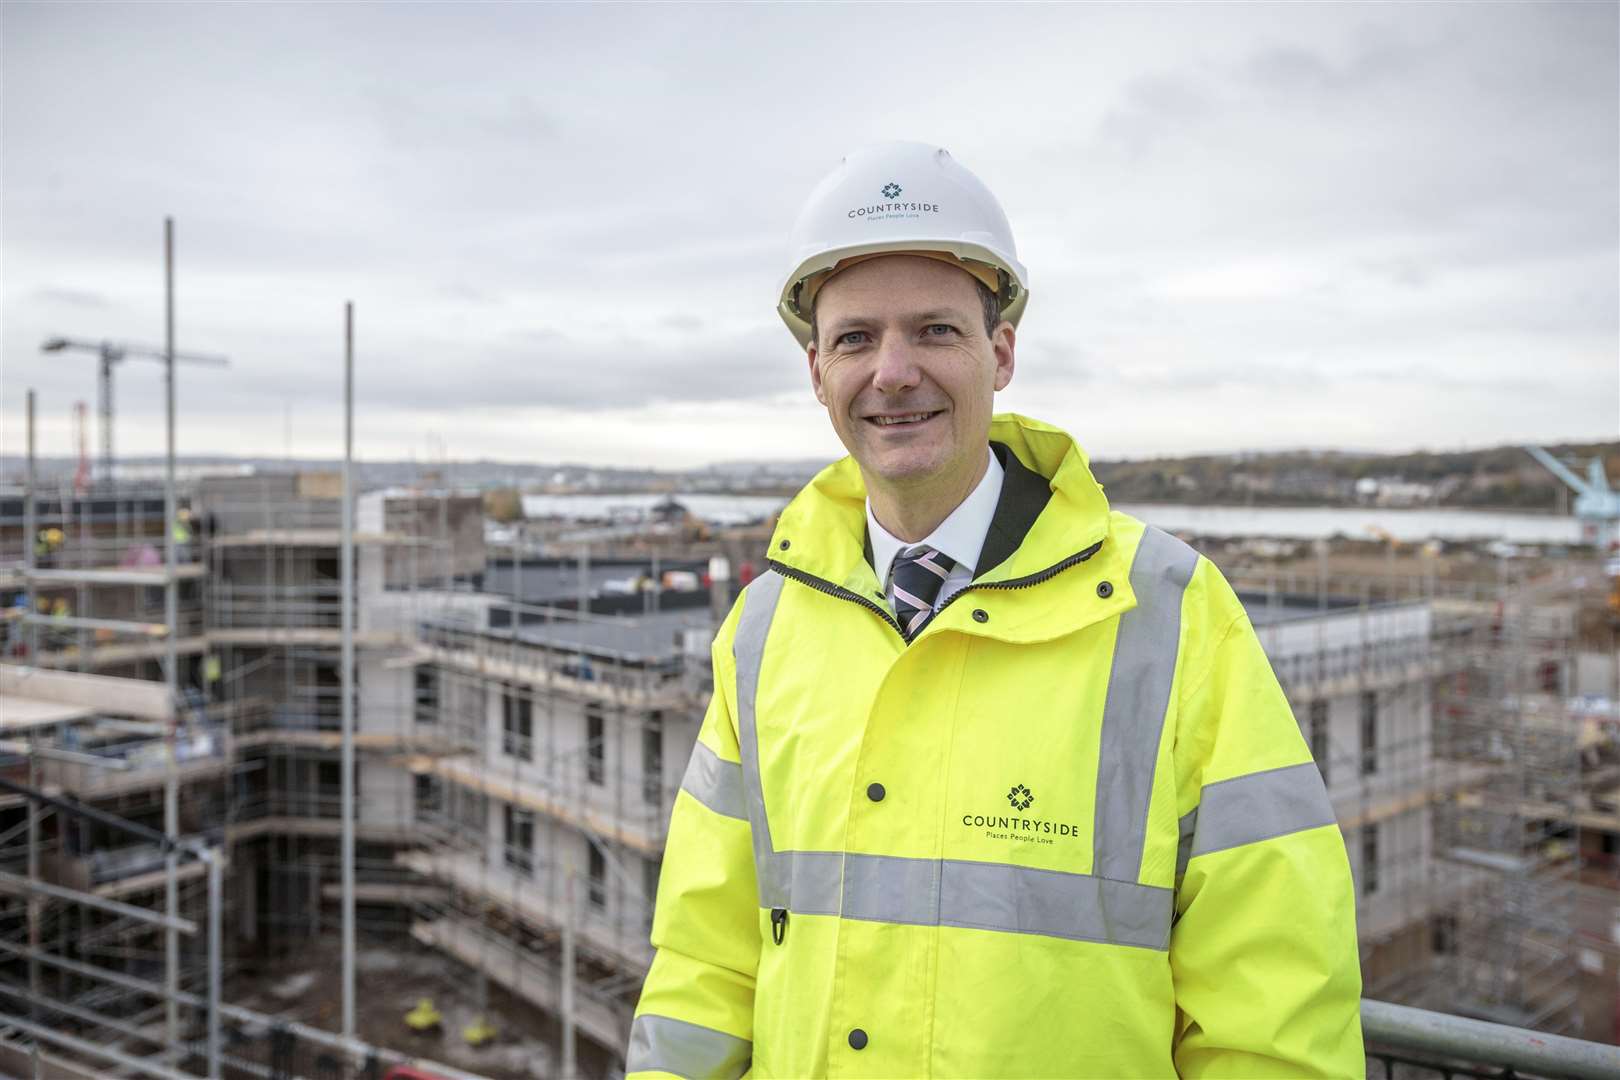 Countryside managing director of new homes and communities south Iain McPherson